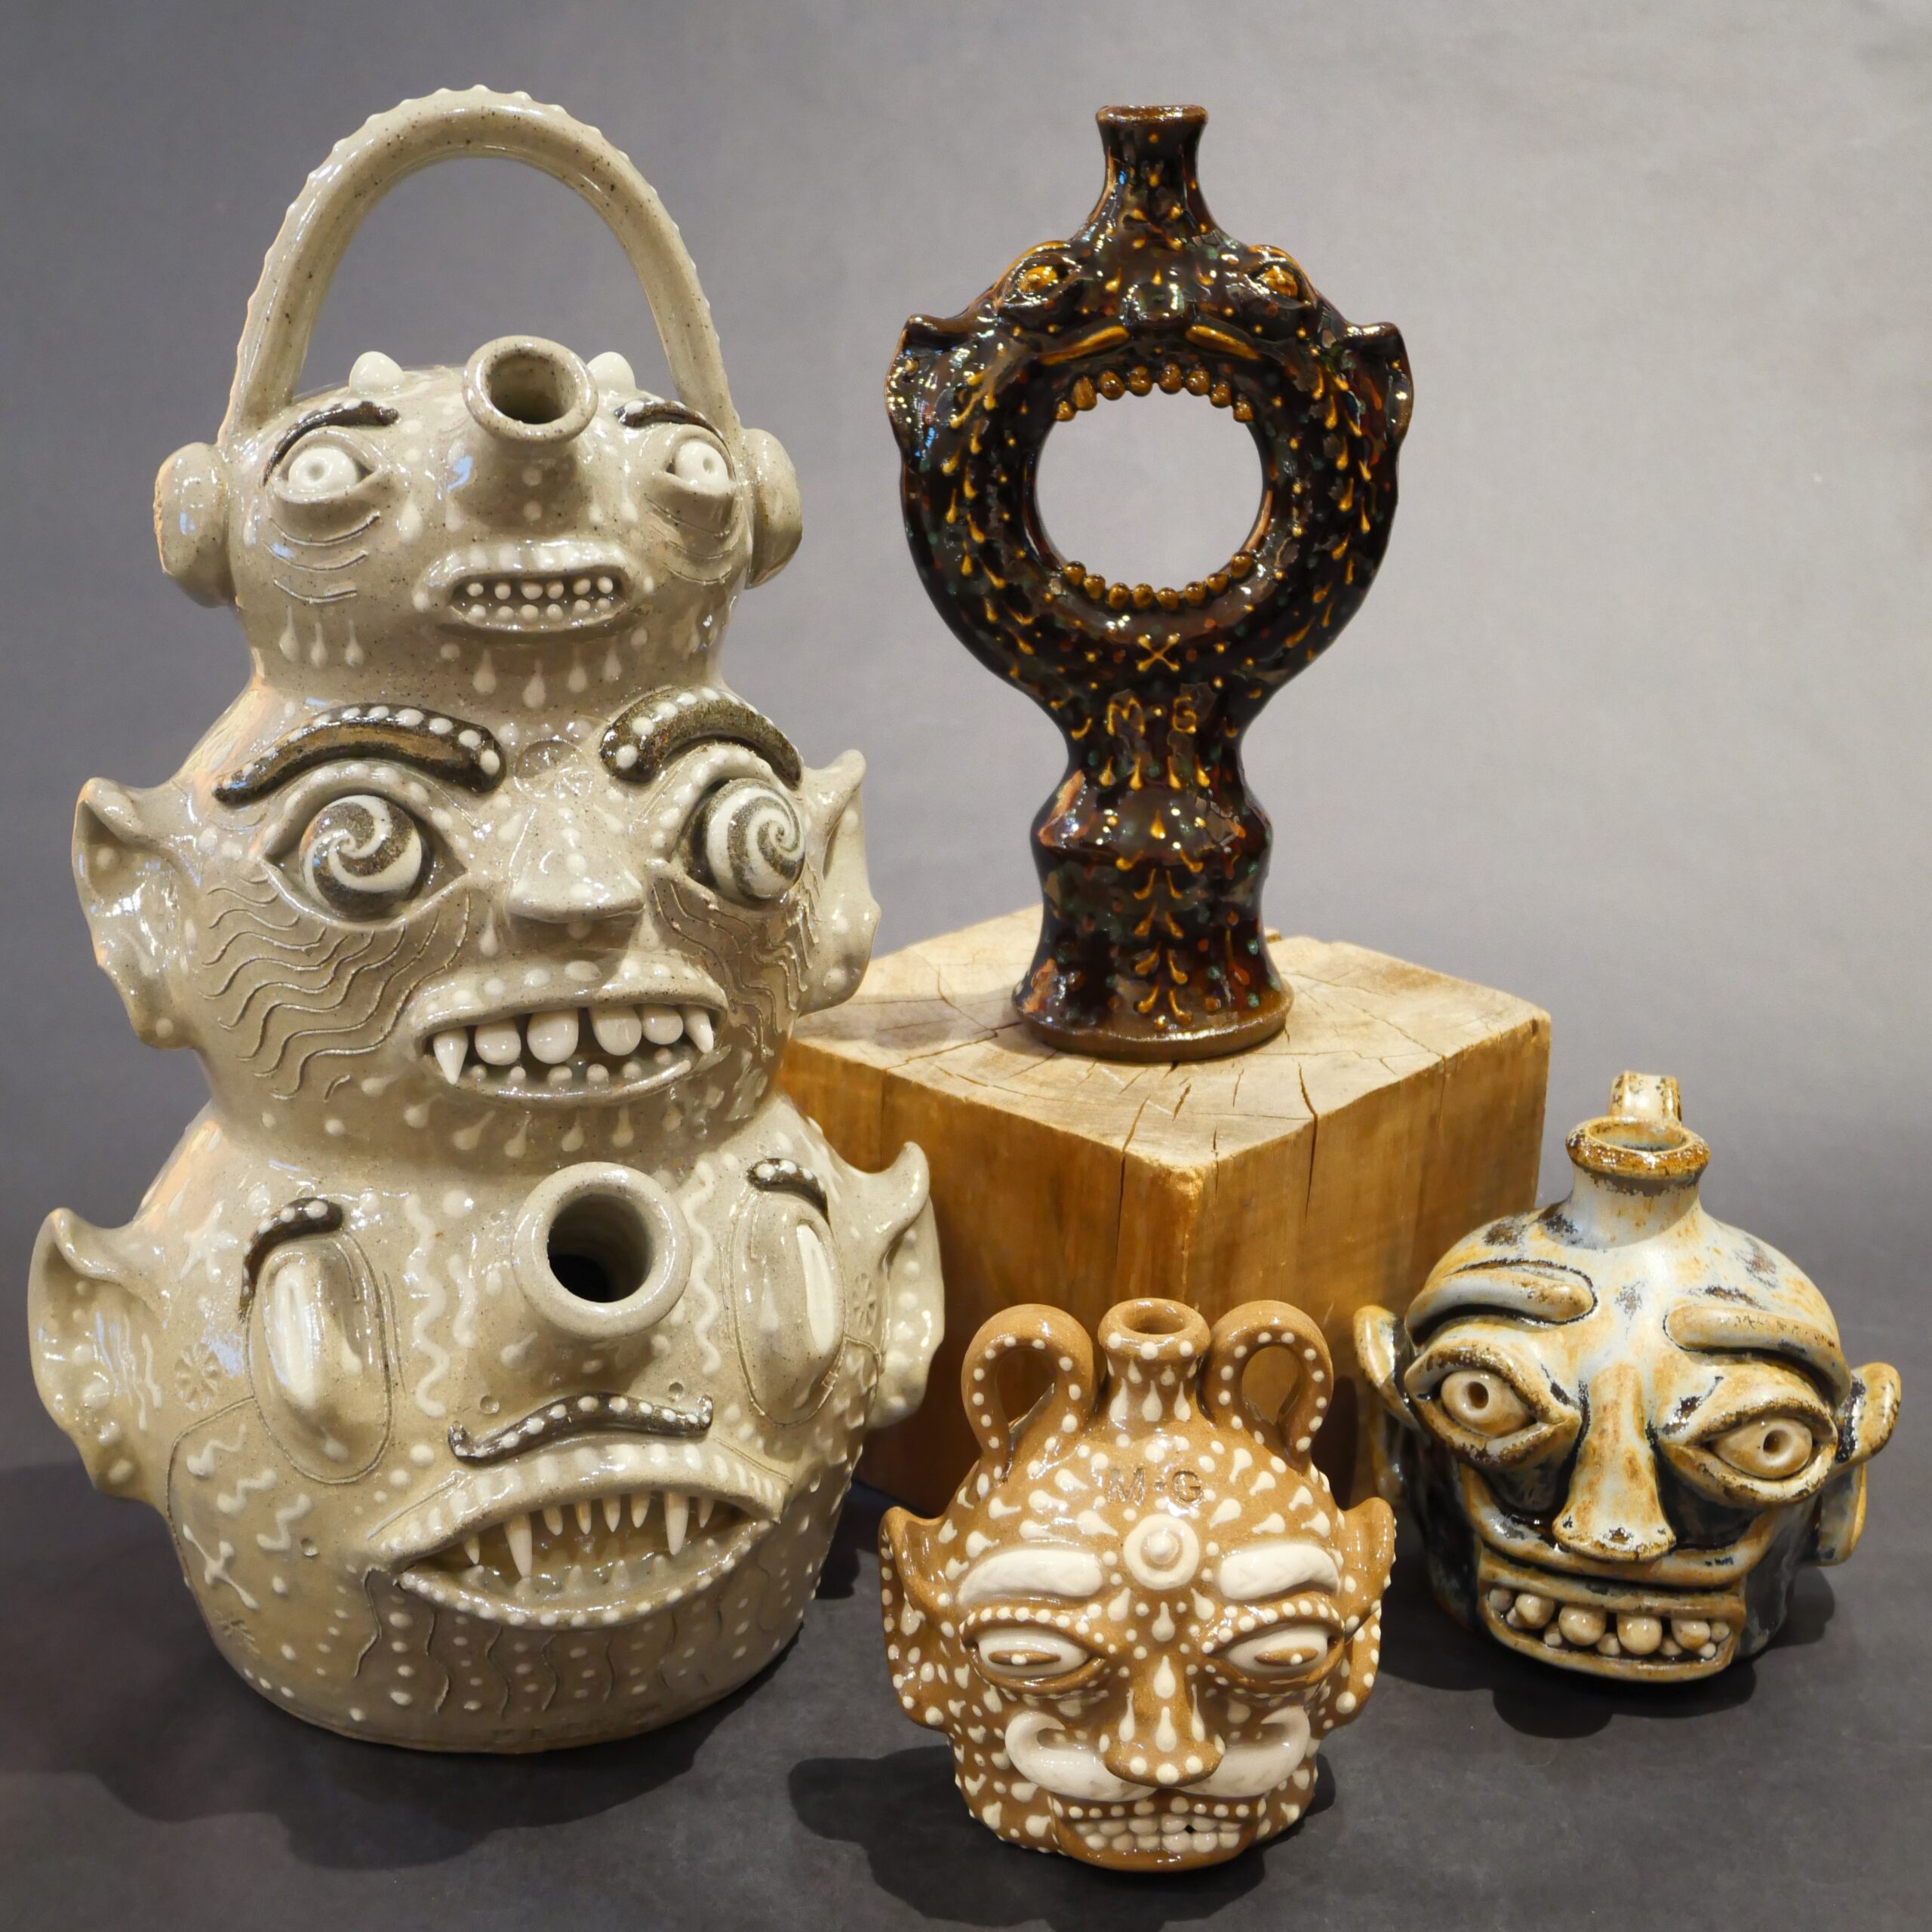 12th Annual Face Jug Show : NOW OPEN!